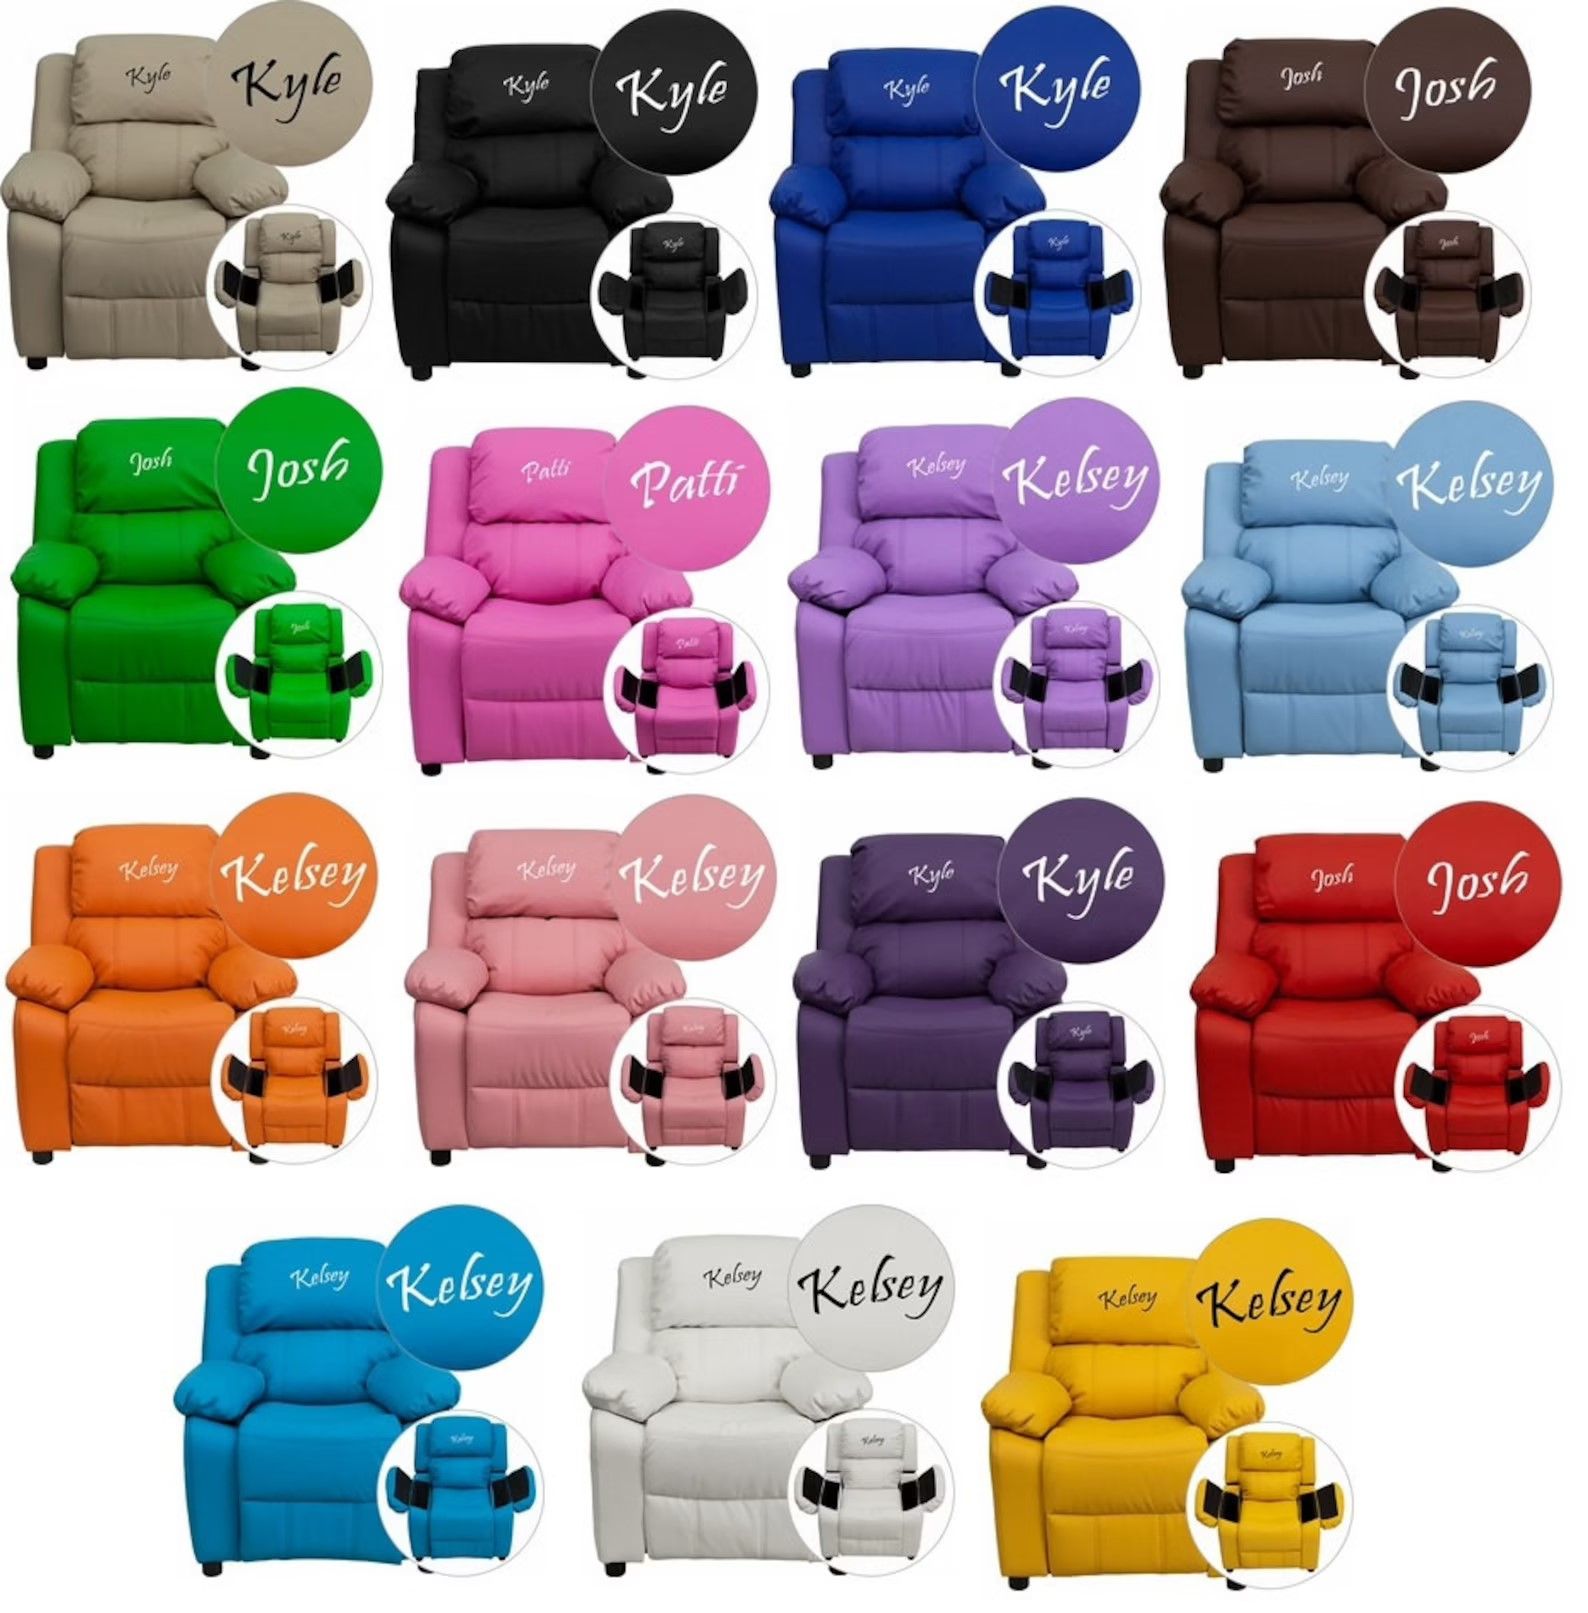 collection of different colored armchairs with names on headrests and armrests that open